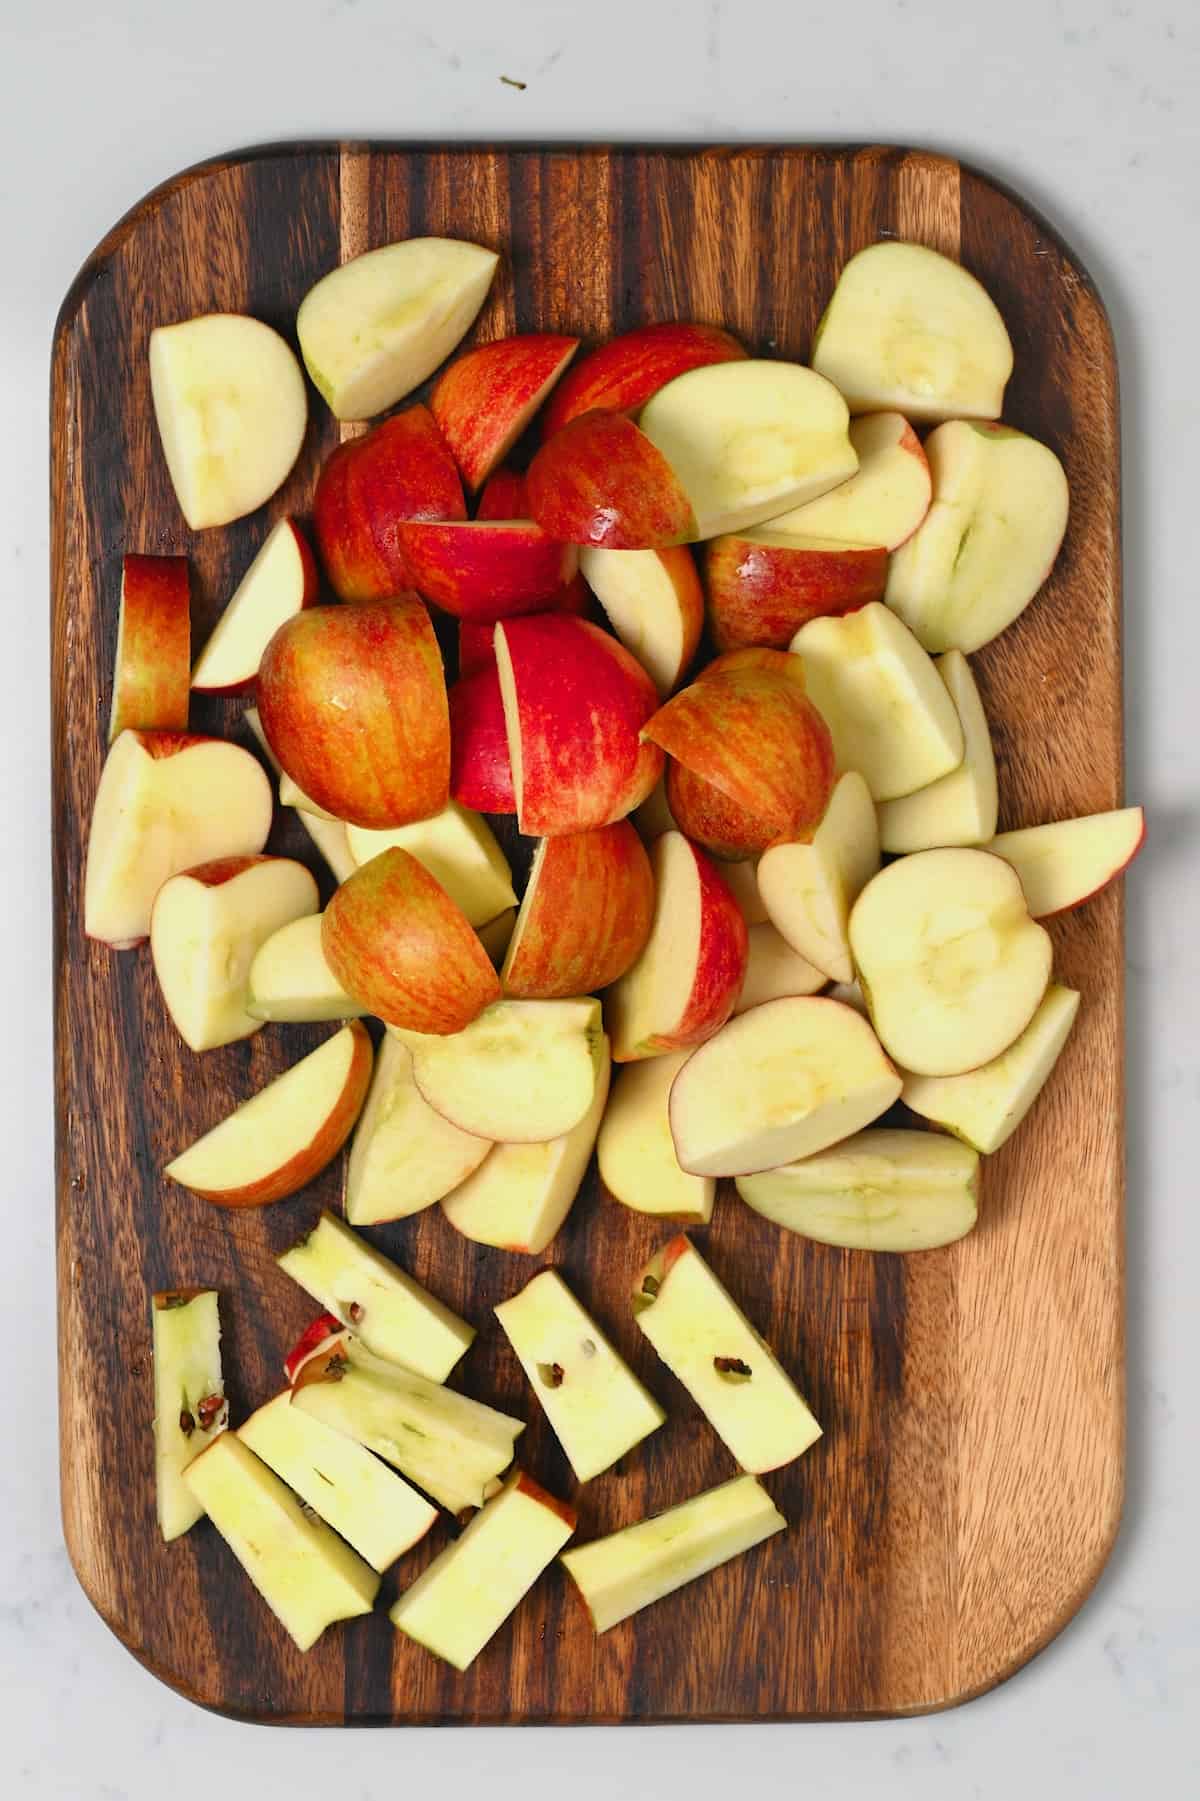 Chopped apples on a cutting board